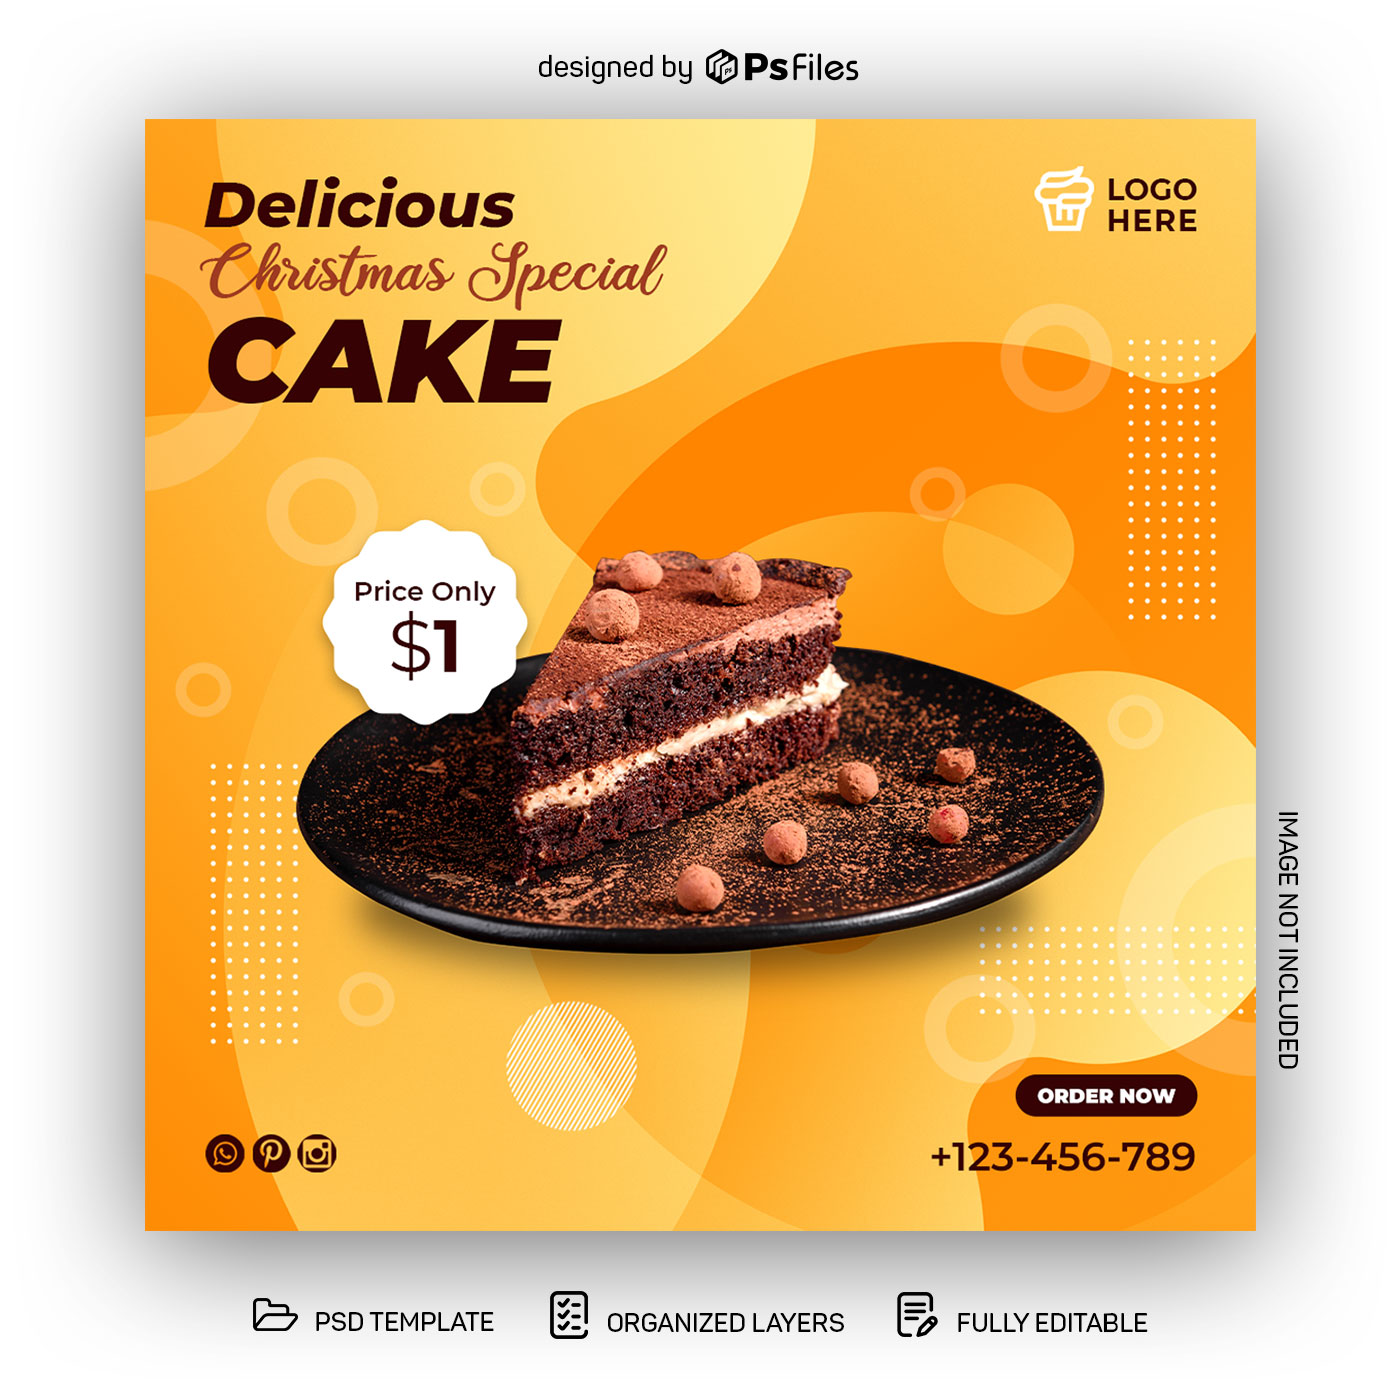 Free Dessert and Cake Shop Instagram Post Template PSD